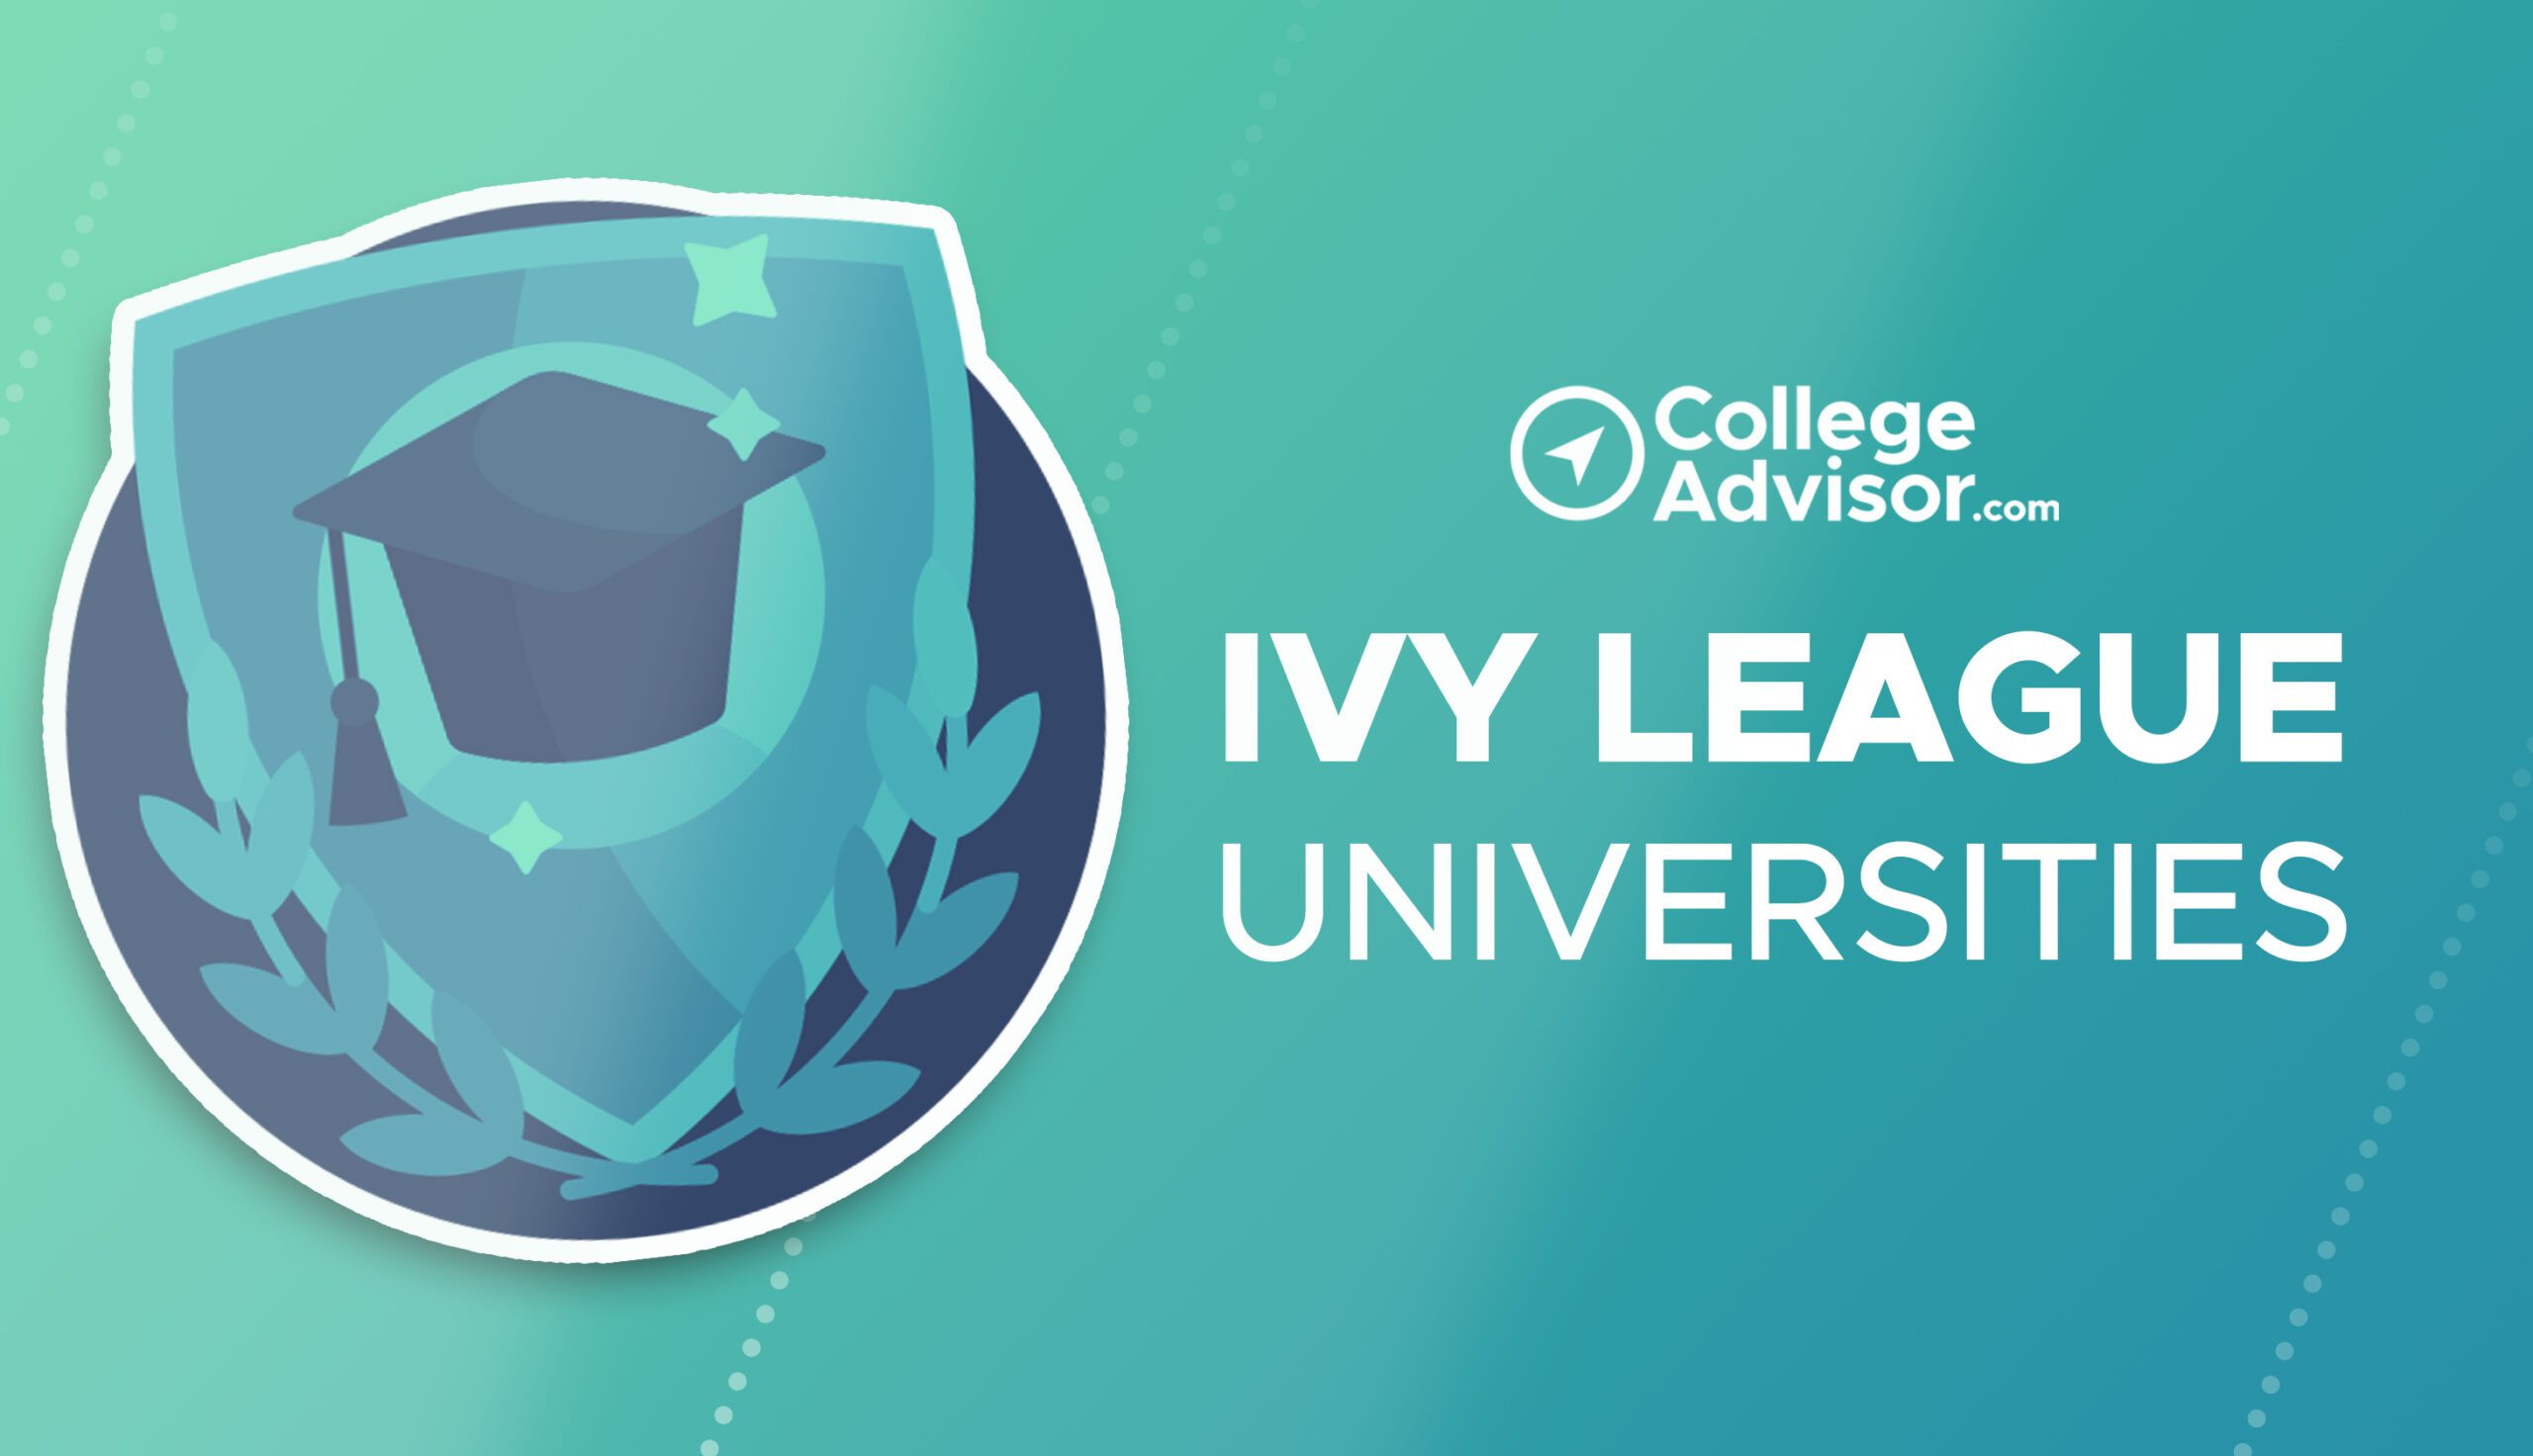 Ivy League Universities & What is the Ivy League? Expert Guide